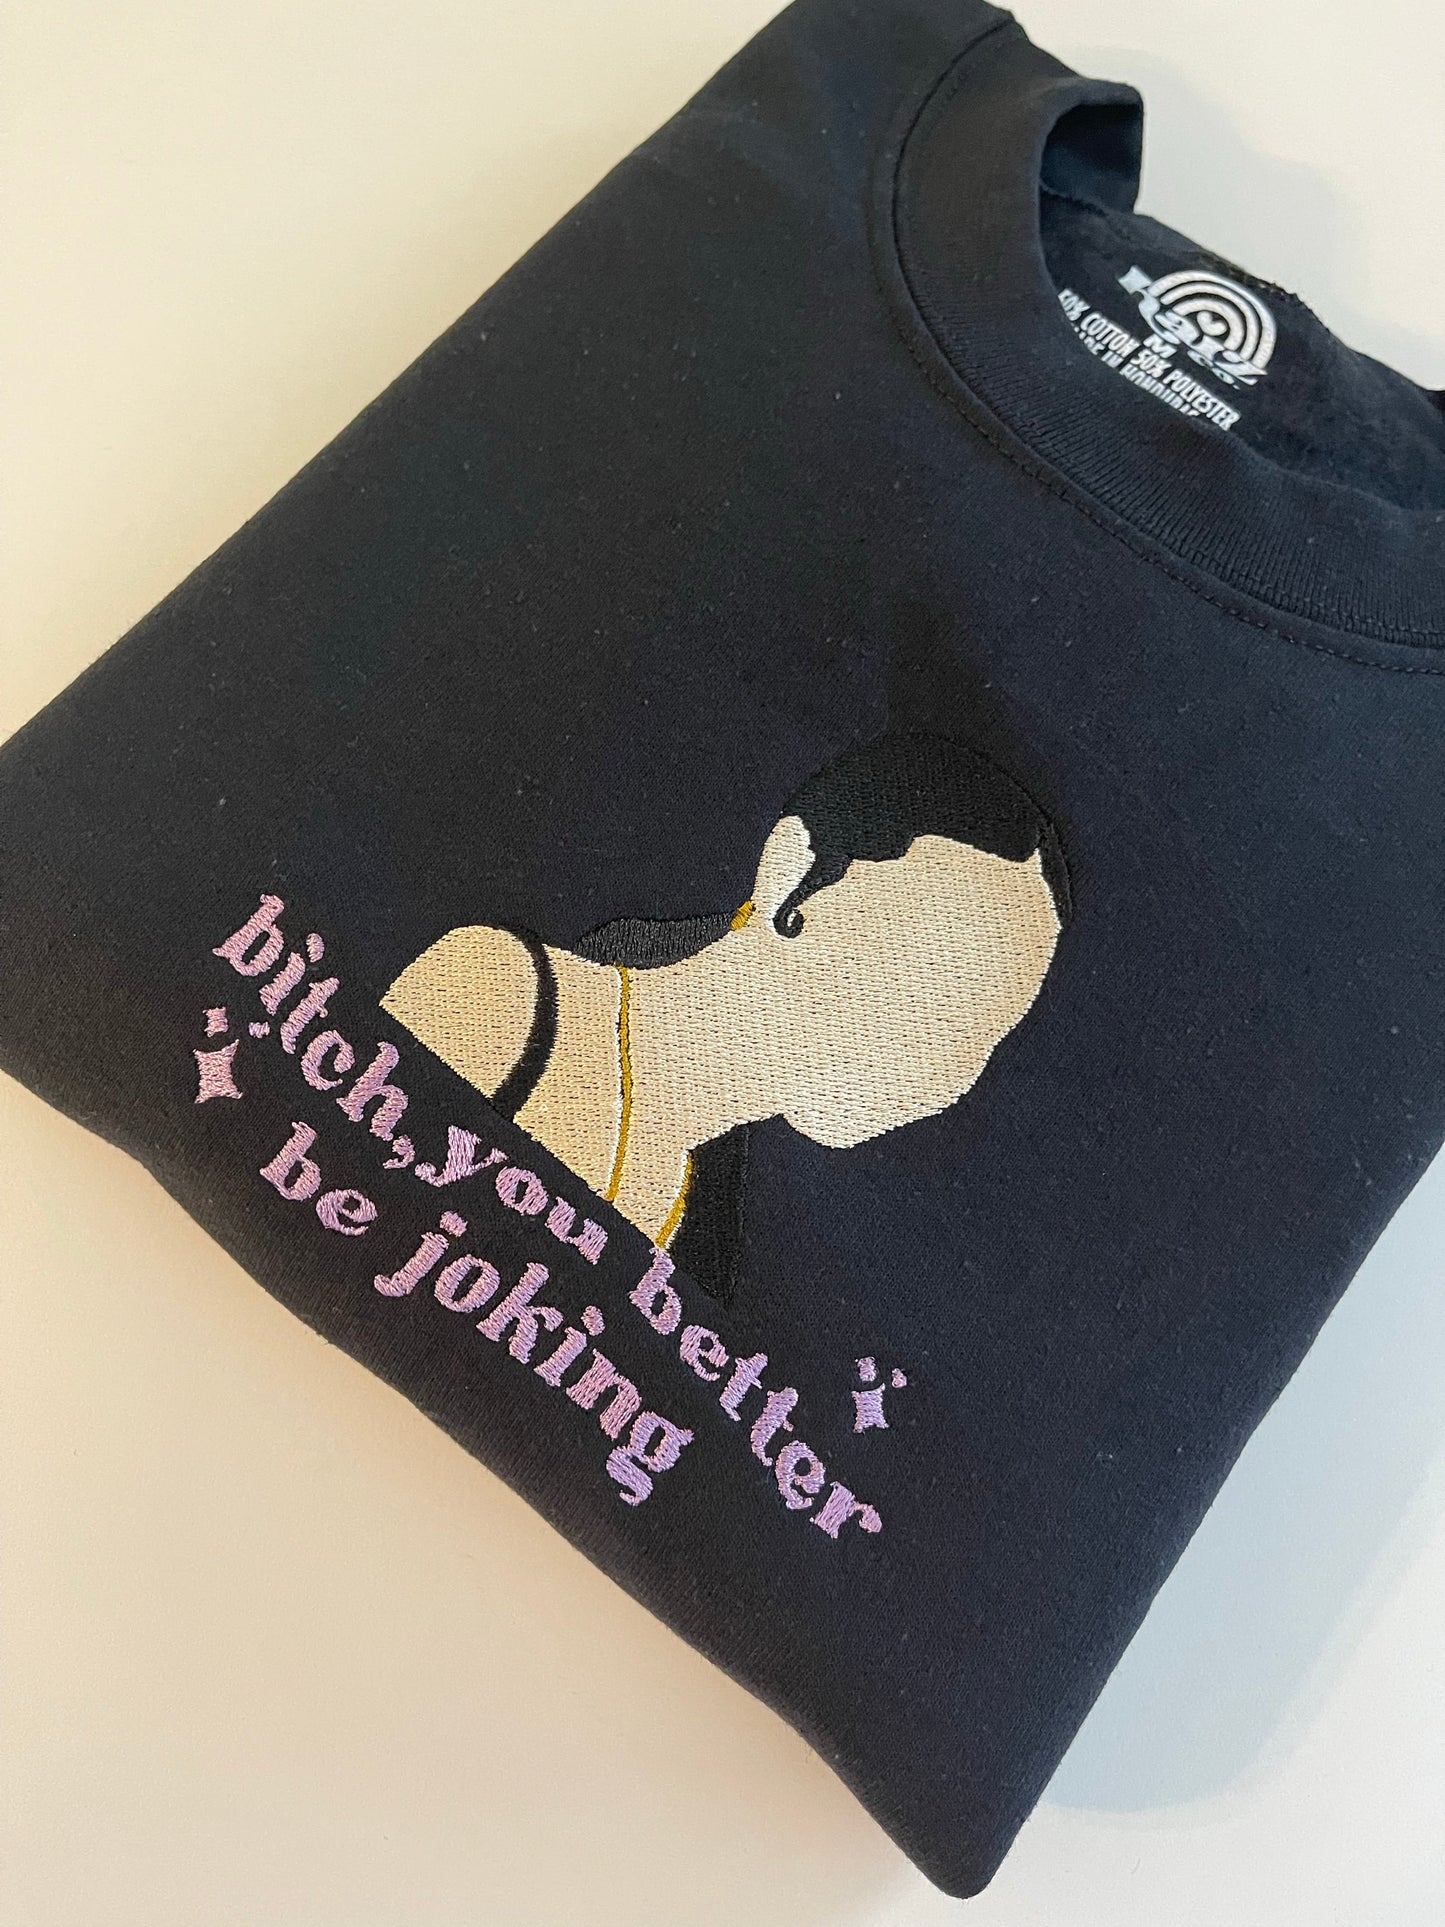 Bitch You Better Be Joking embroidered sweatshirt